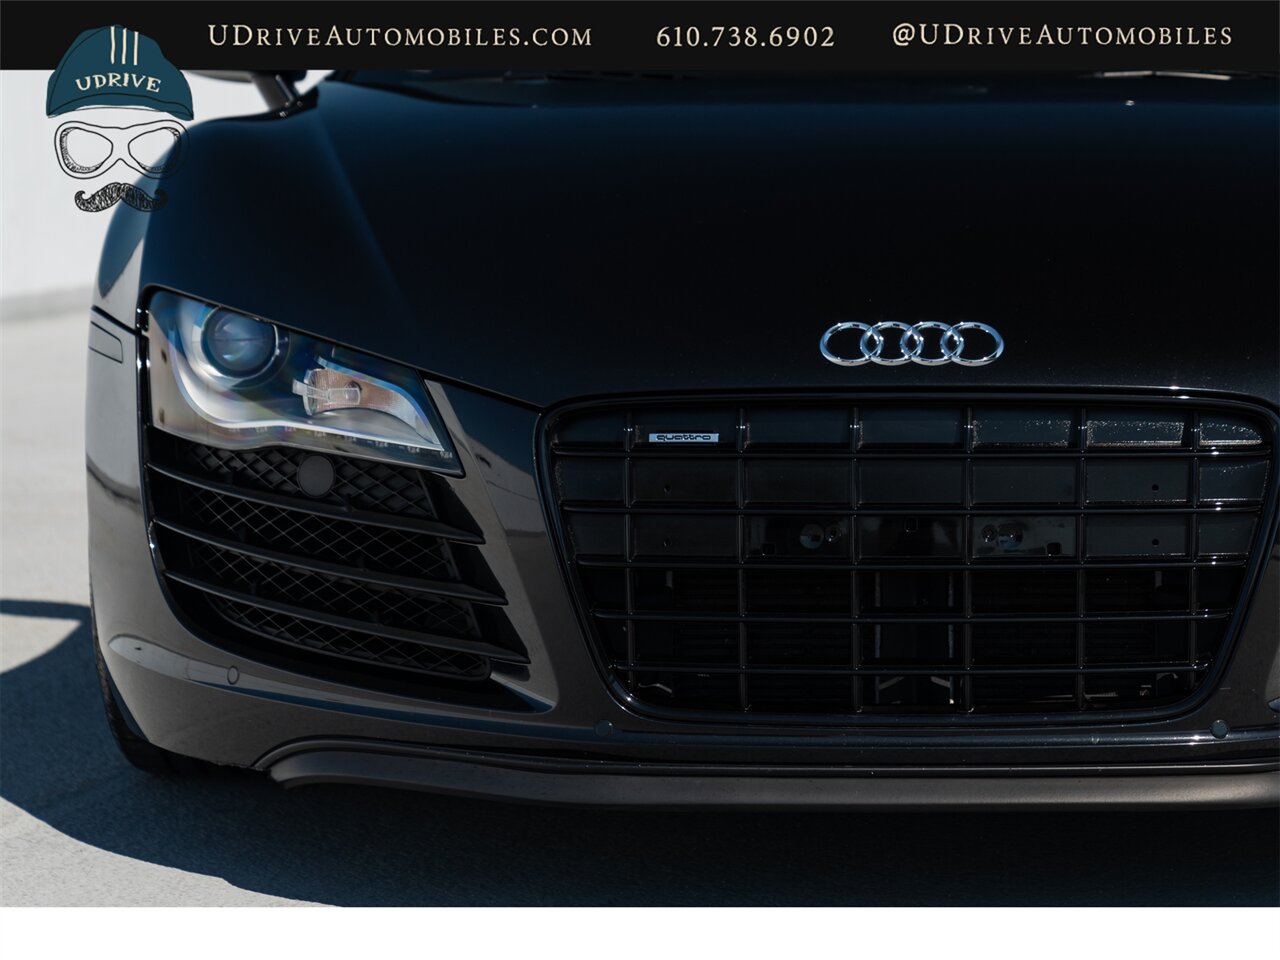 2009 Audi R8 Quattro  4.2L V8 6 Speed Manual - Photo 14 - West Chester, PA 19382